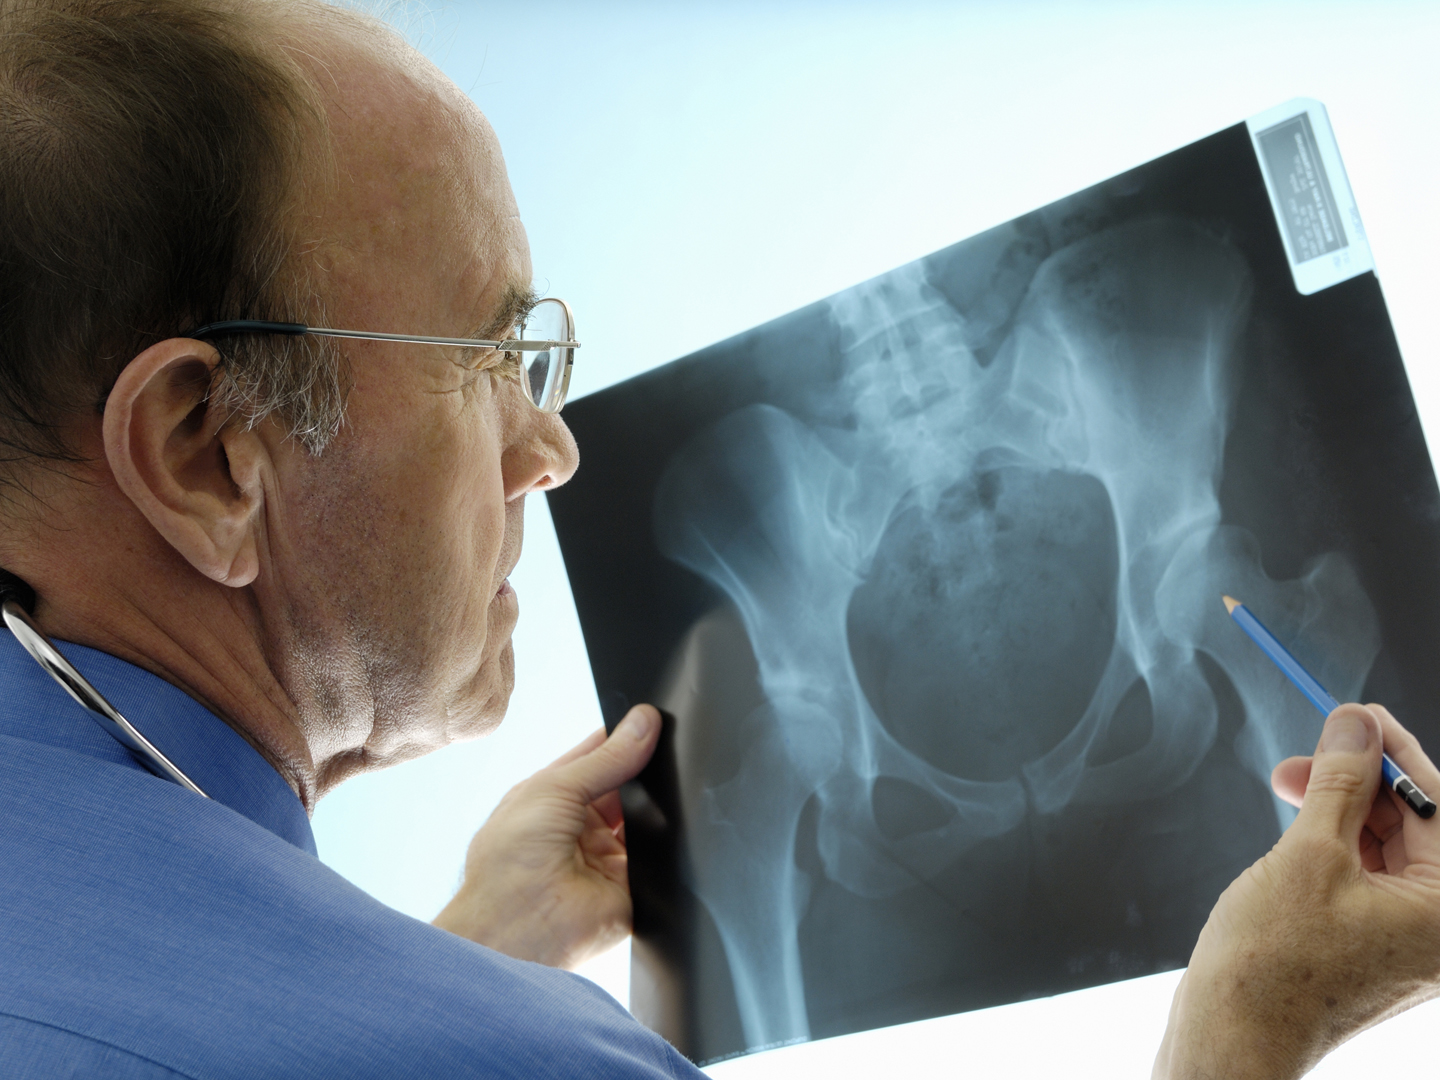 An experienced Caucasian orthopaedic surgeon (doctor) examining a pelvic x-ray displaying signs of osteoporosis - hip degeneration.  Actual x-ray of a 42 year-old woman with a degenerative hip.  The Orthopaedic surgeon is using a pencil to point at the hip where the problem is. This patient is a candidate (real) for hip replacement.  The dominant colour is blue.